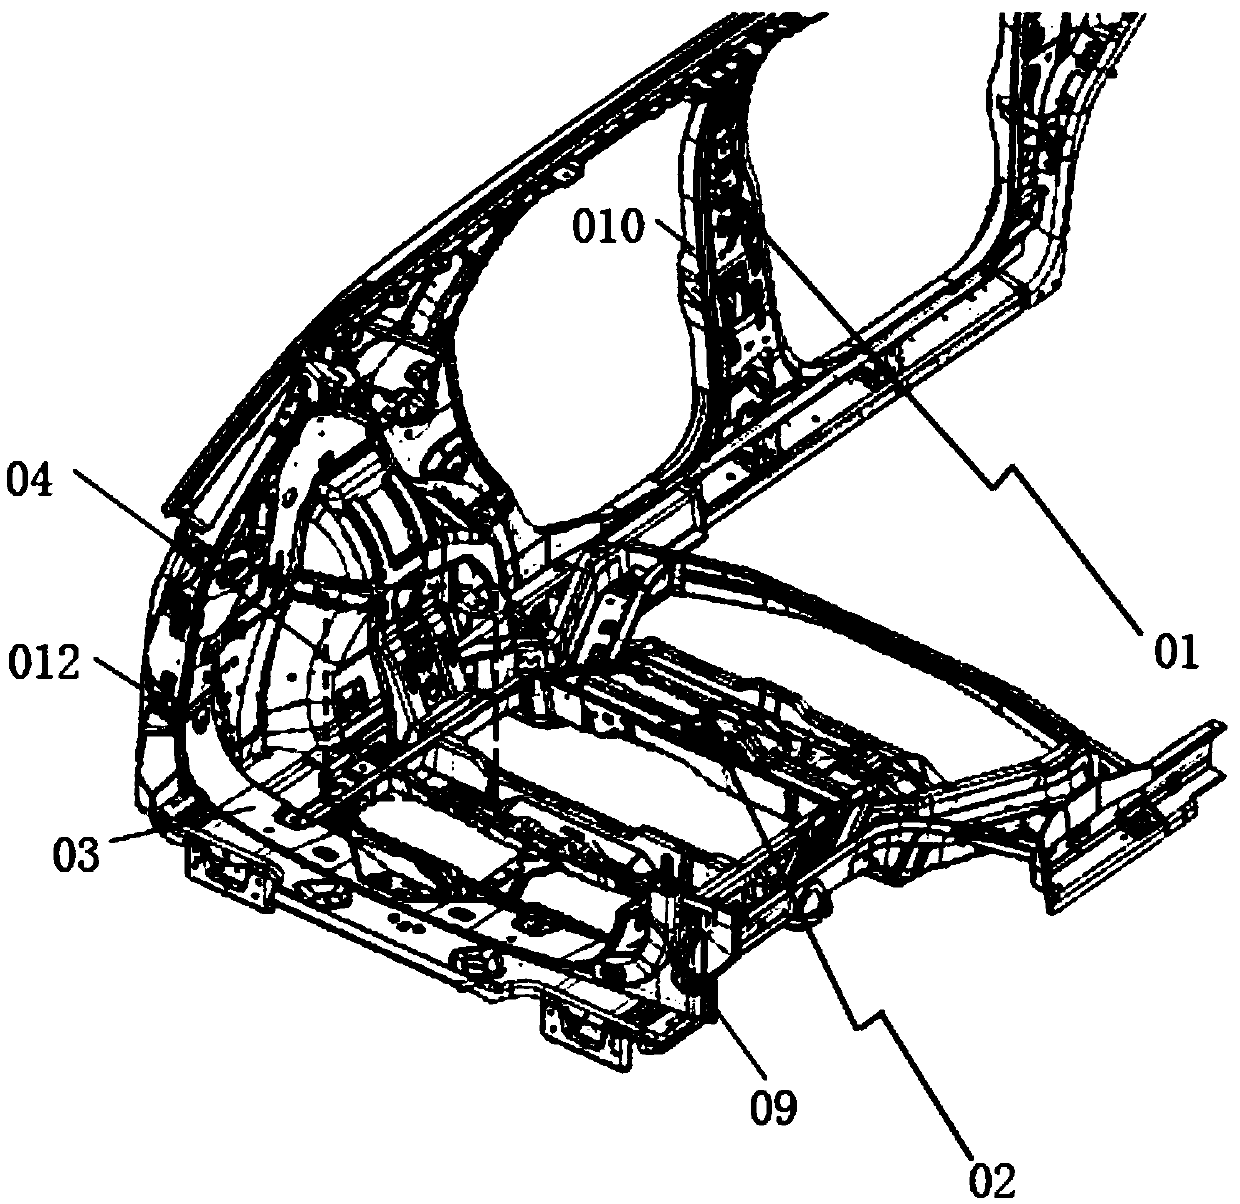 Lower vehicle body rear frame assembly